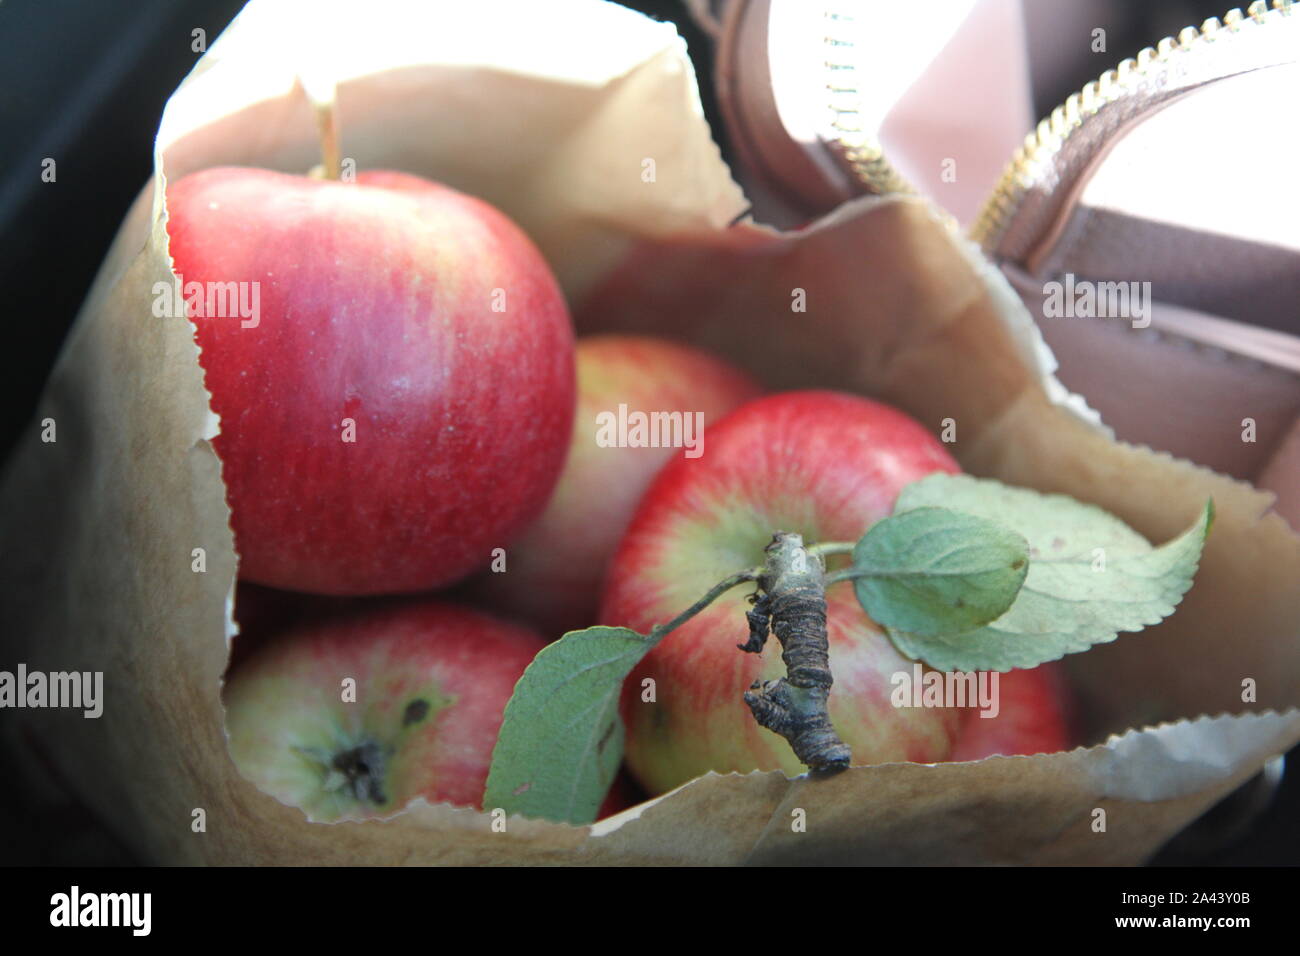 Freshly picked apples in a paper bag Stock Photo